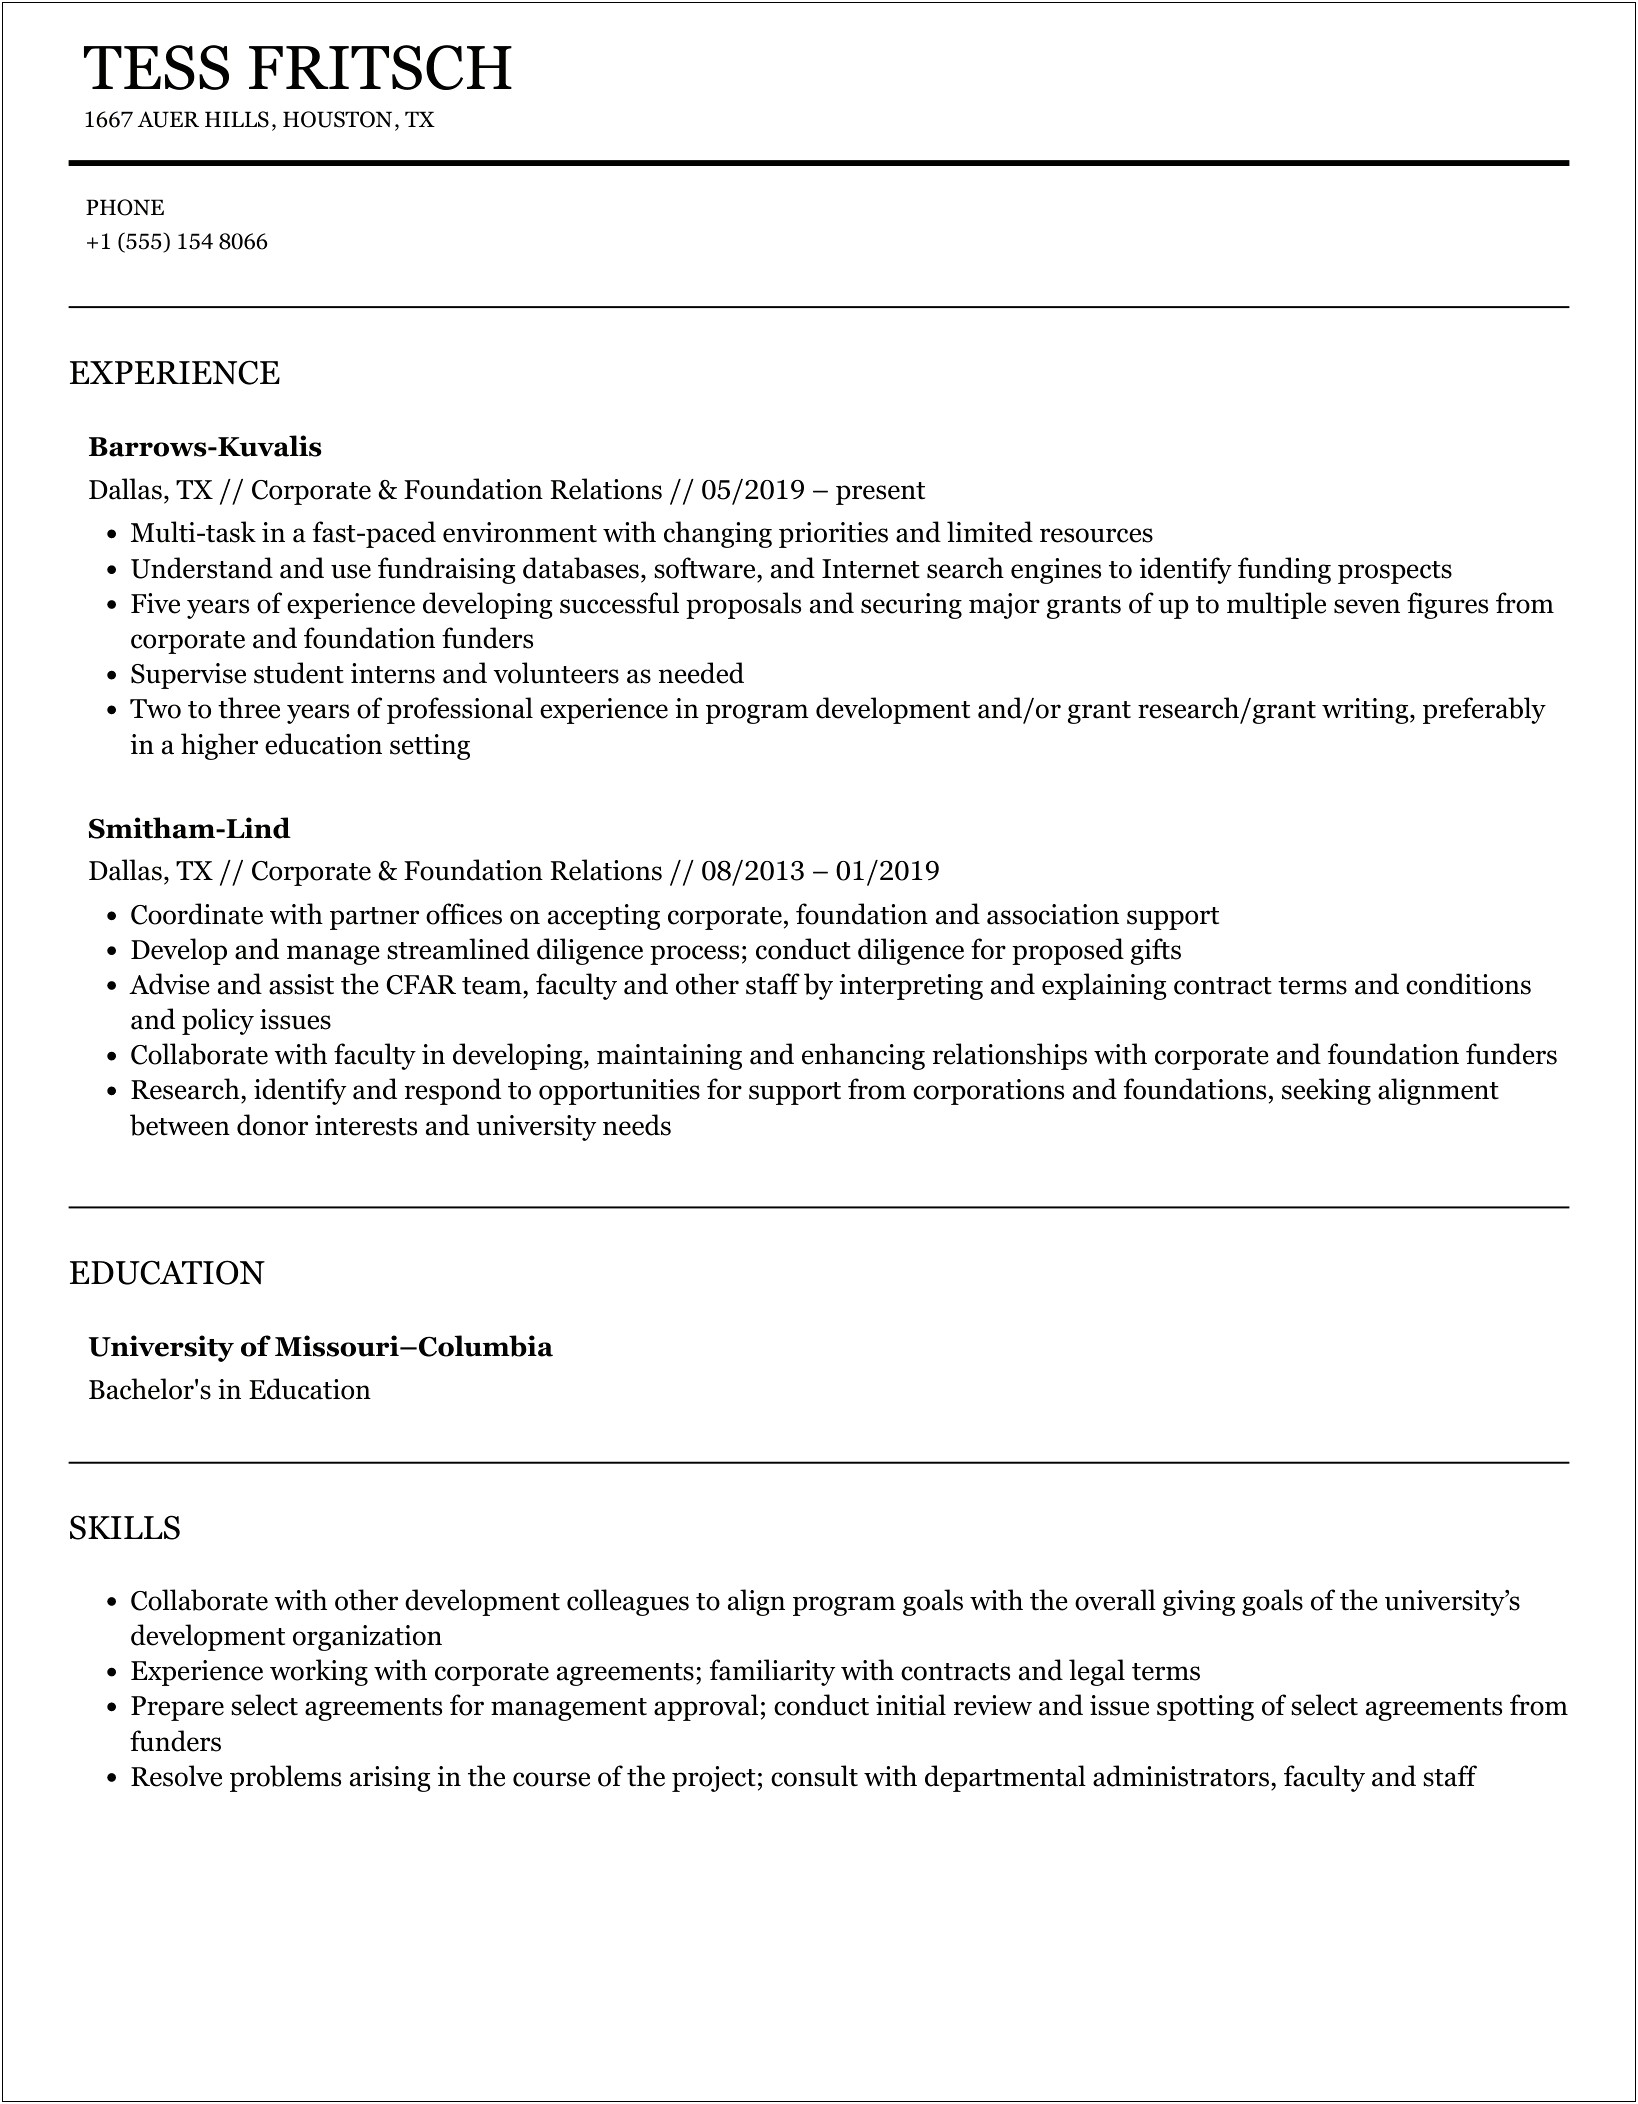 Resume Template Foundation And Corporate Grants